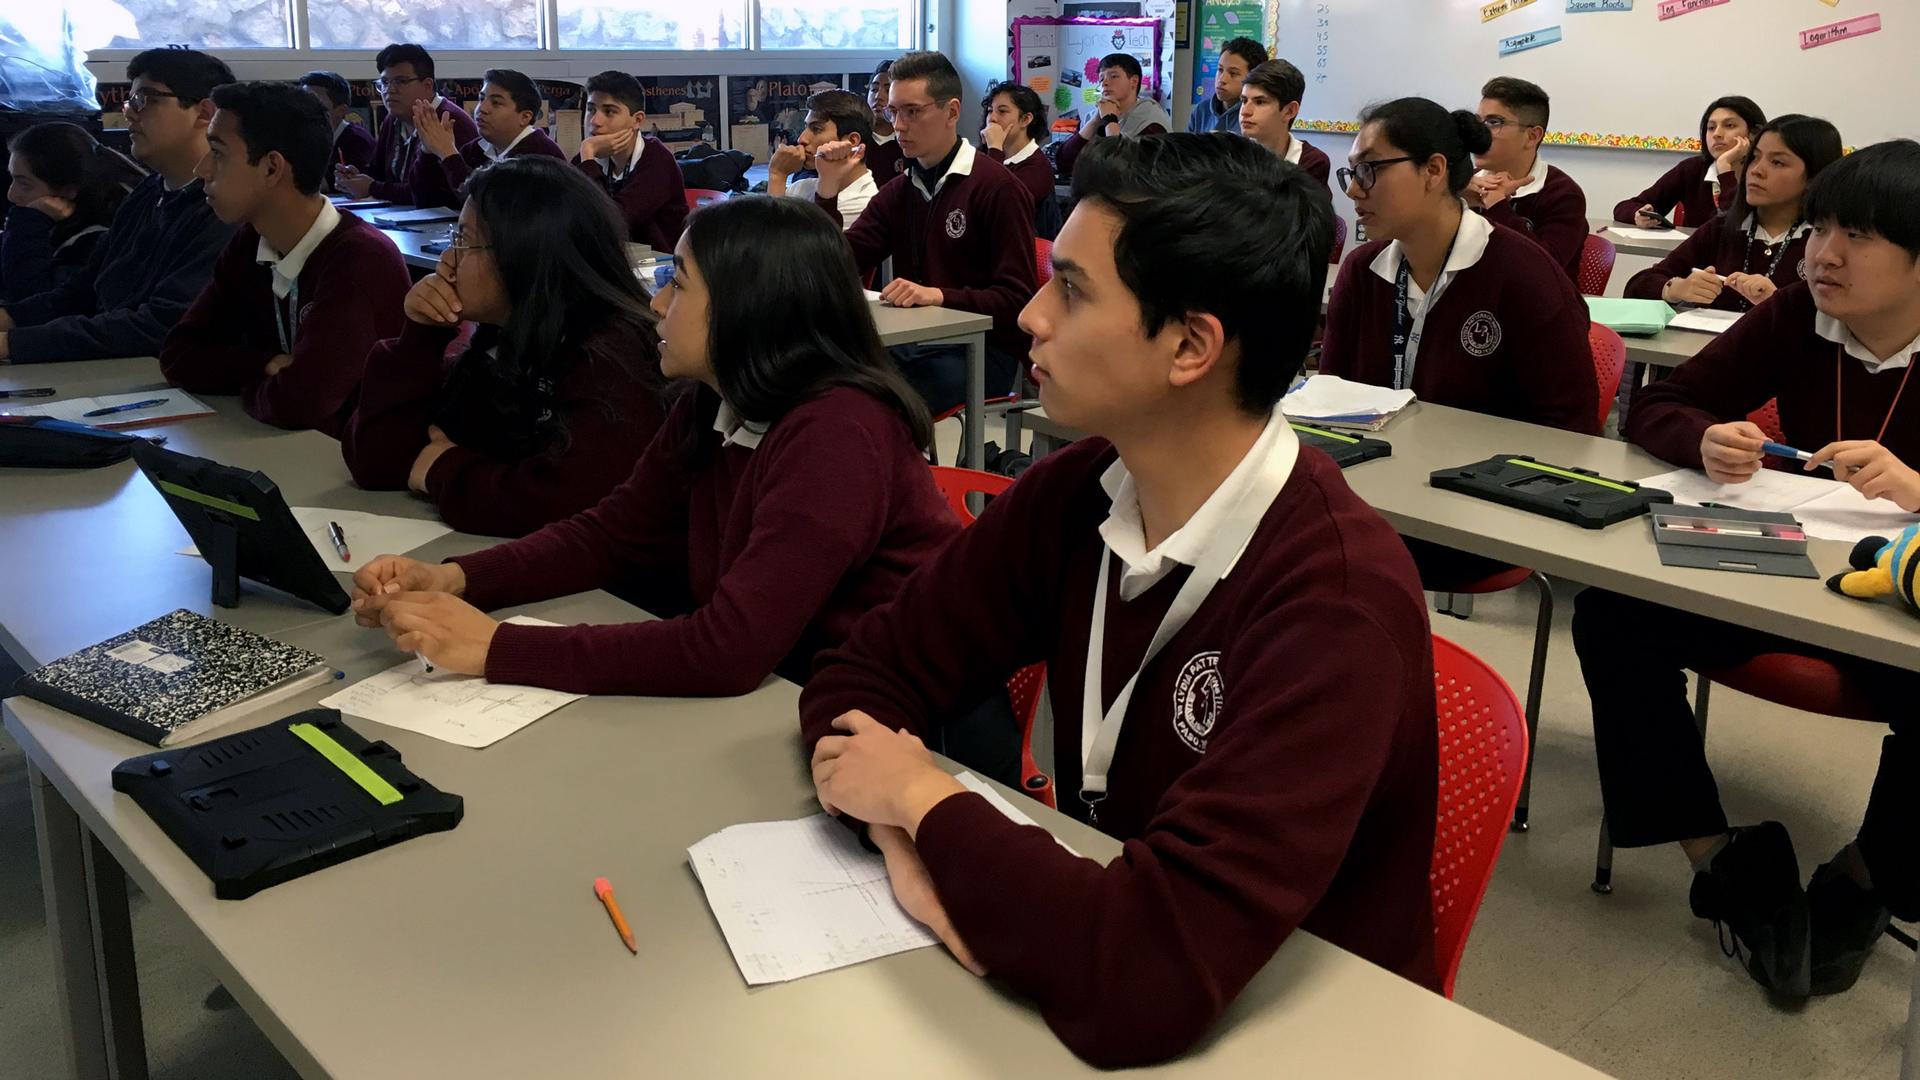 Students in maroon uniforms sit at desks and listen to a teacher, not pictured